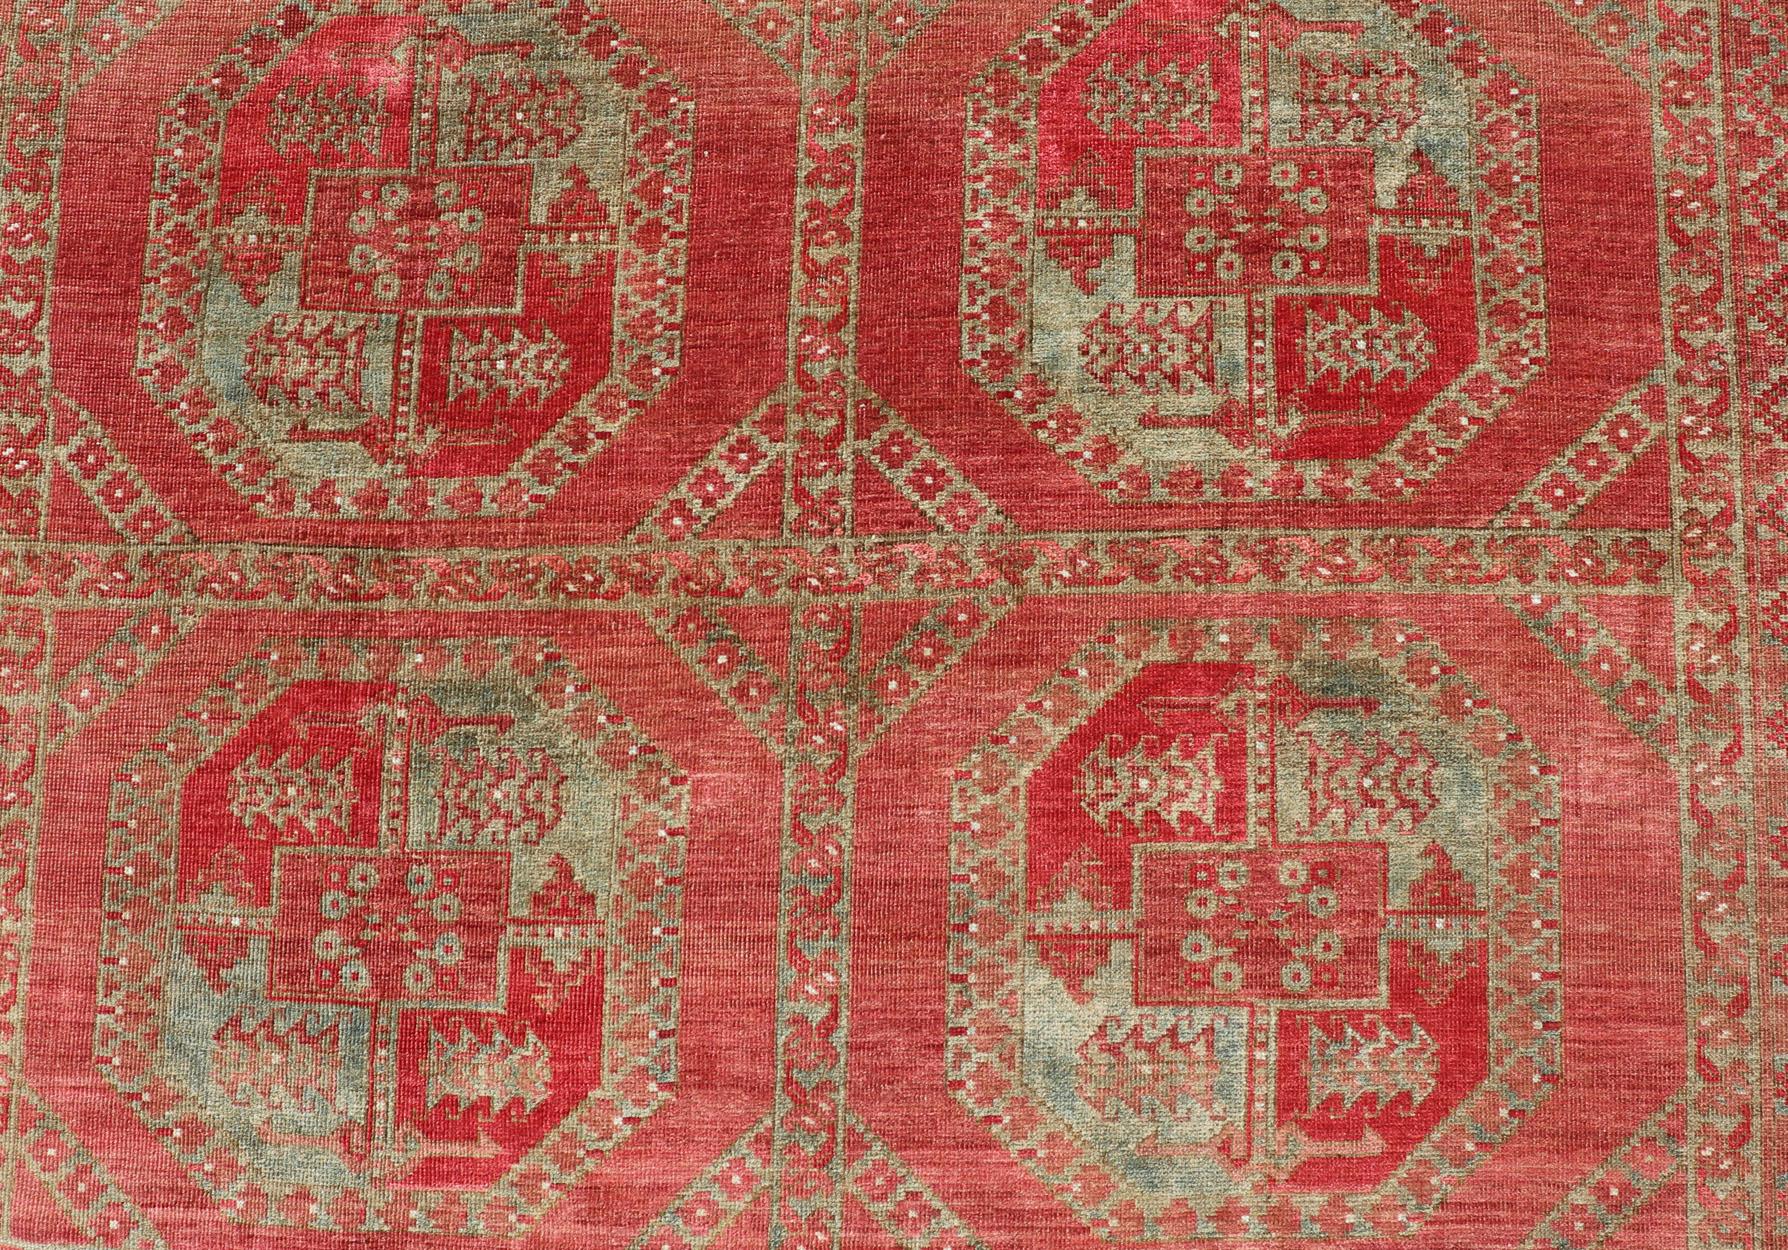 Hand-Carved Hand-Knotted Wool Ersari Rug in Wool with Gul Design in Shades of Red & Green